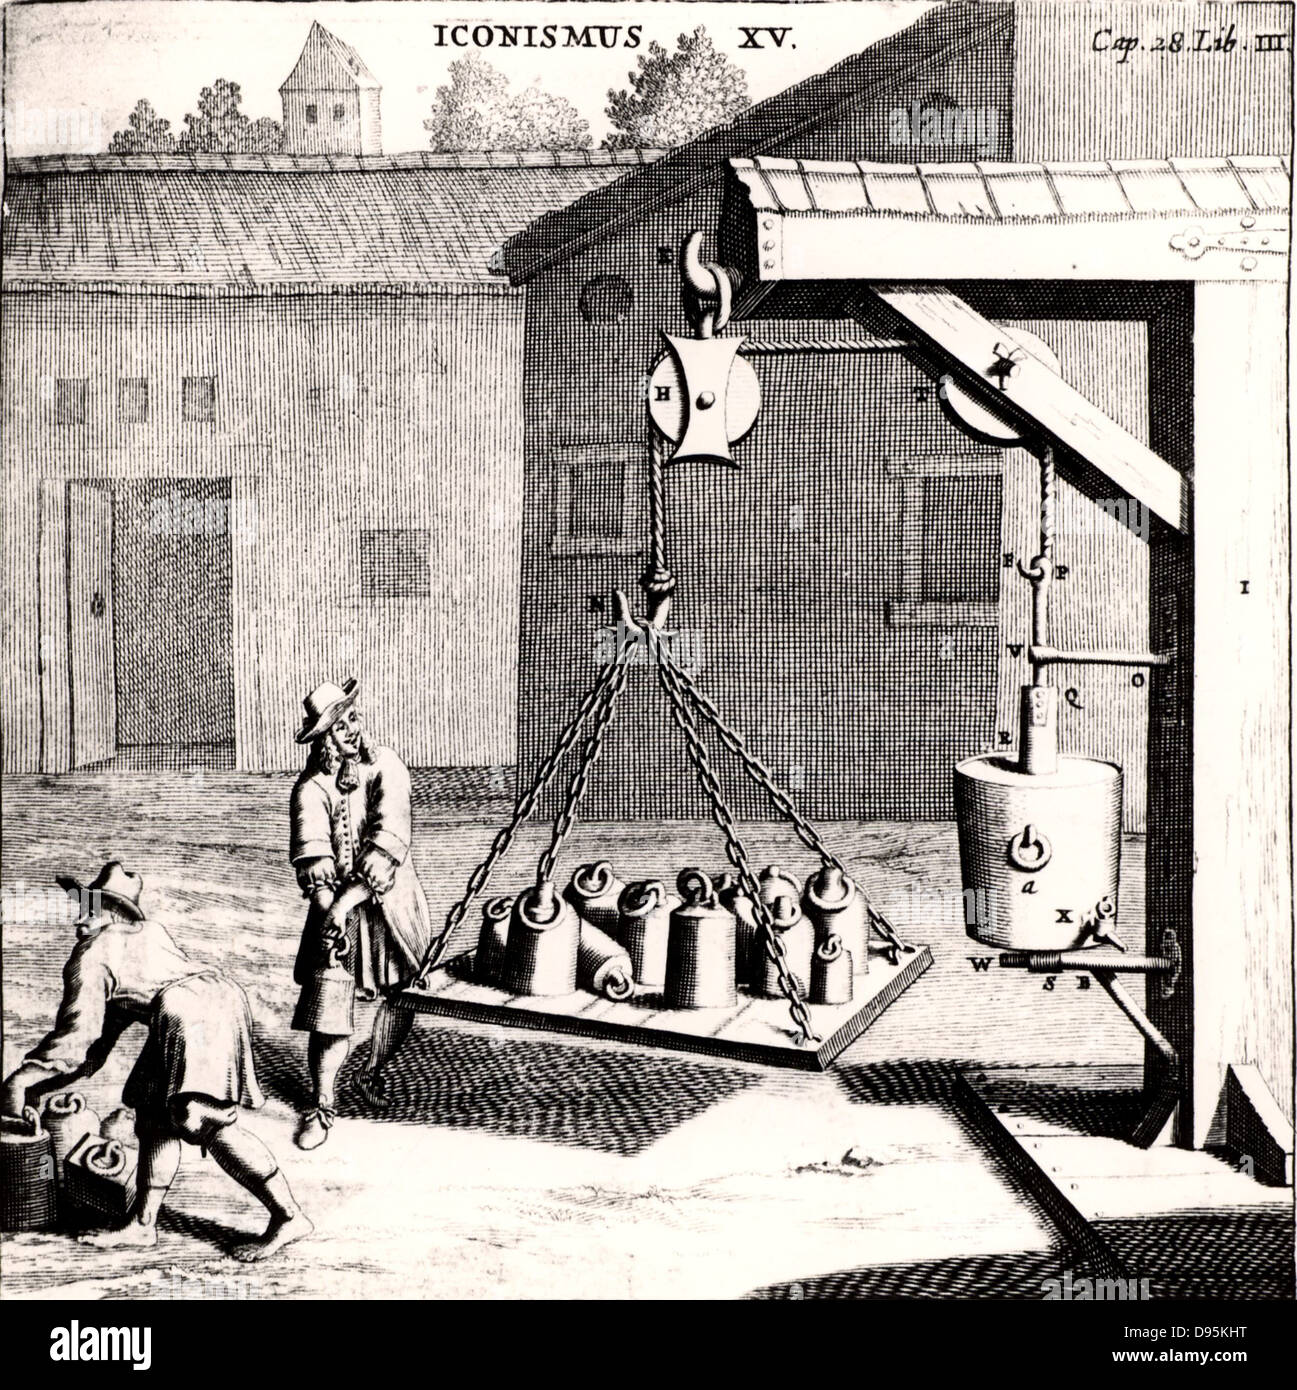 Demonstrating the strength of a vacuum. Vessel from which air has been evacuated mounted in frame.  A rope attached is passed over two pulley wheels.  On a wooden platform hung from the end of the rope weights were added until the vacuum was overpowered.  From 'Experimental Nova' by Otto von Guericke (Amsterdam, 1672).  Engraving. Stock Photo